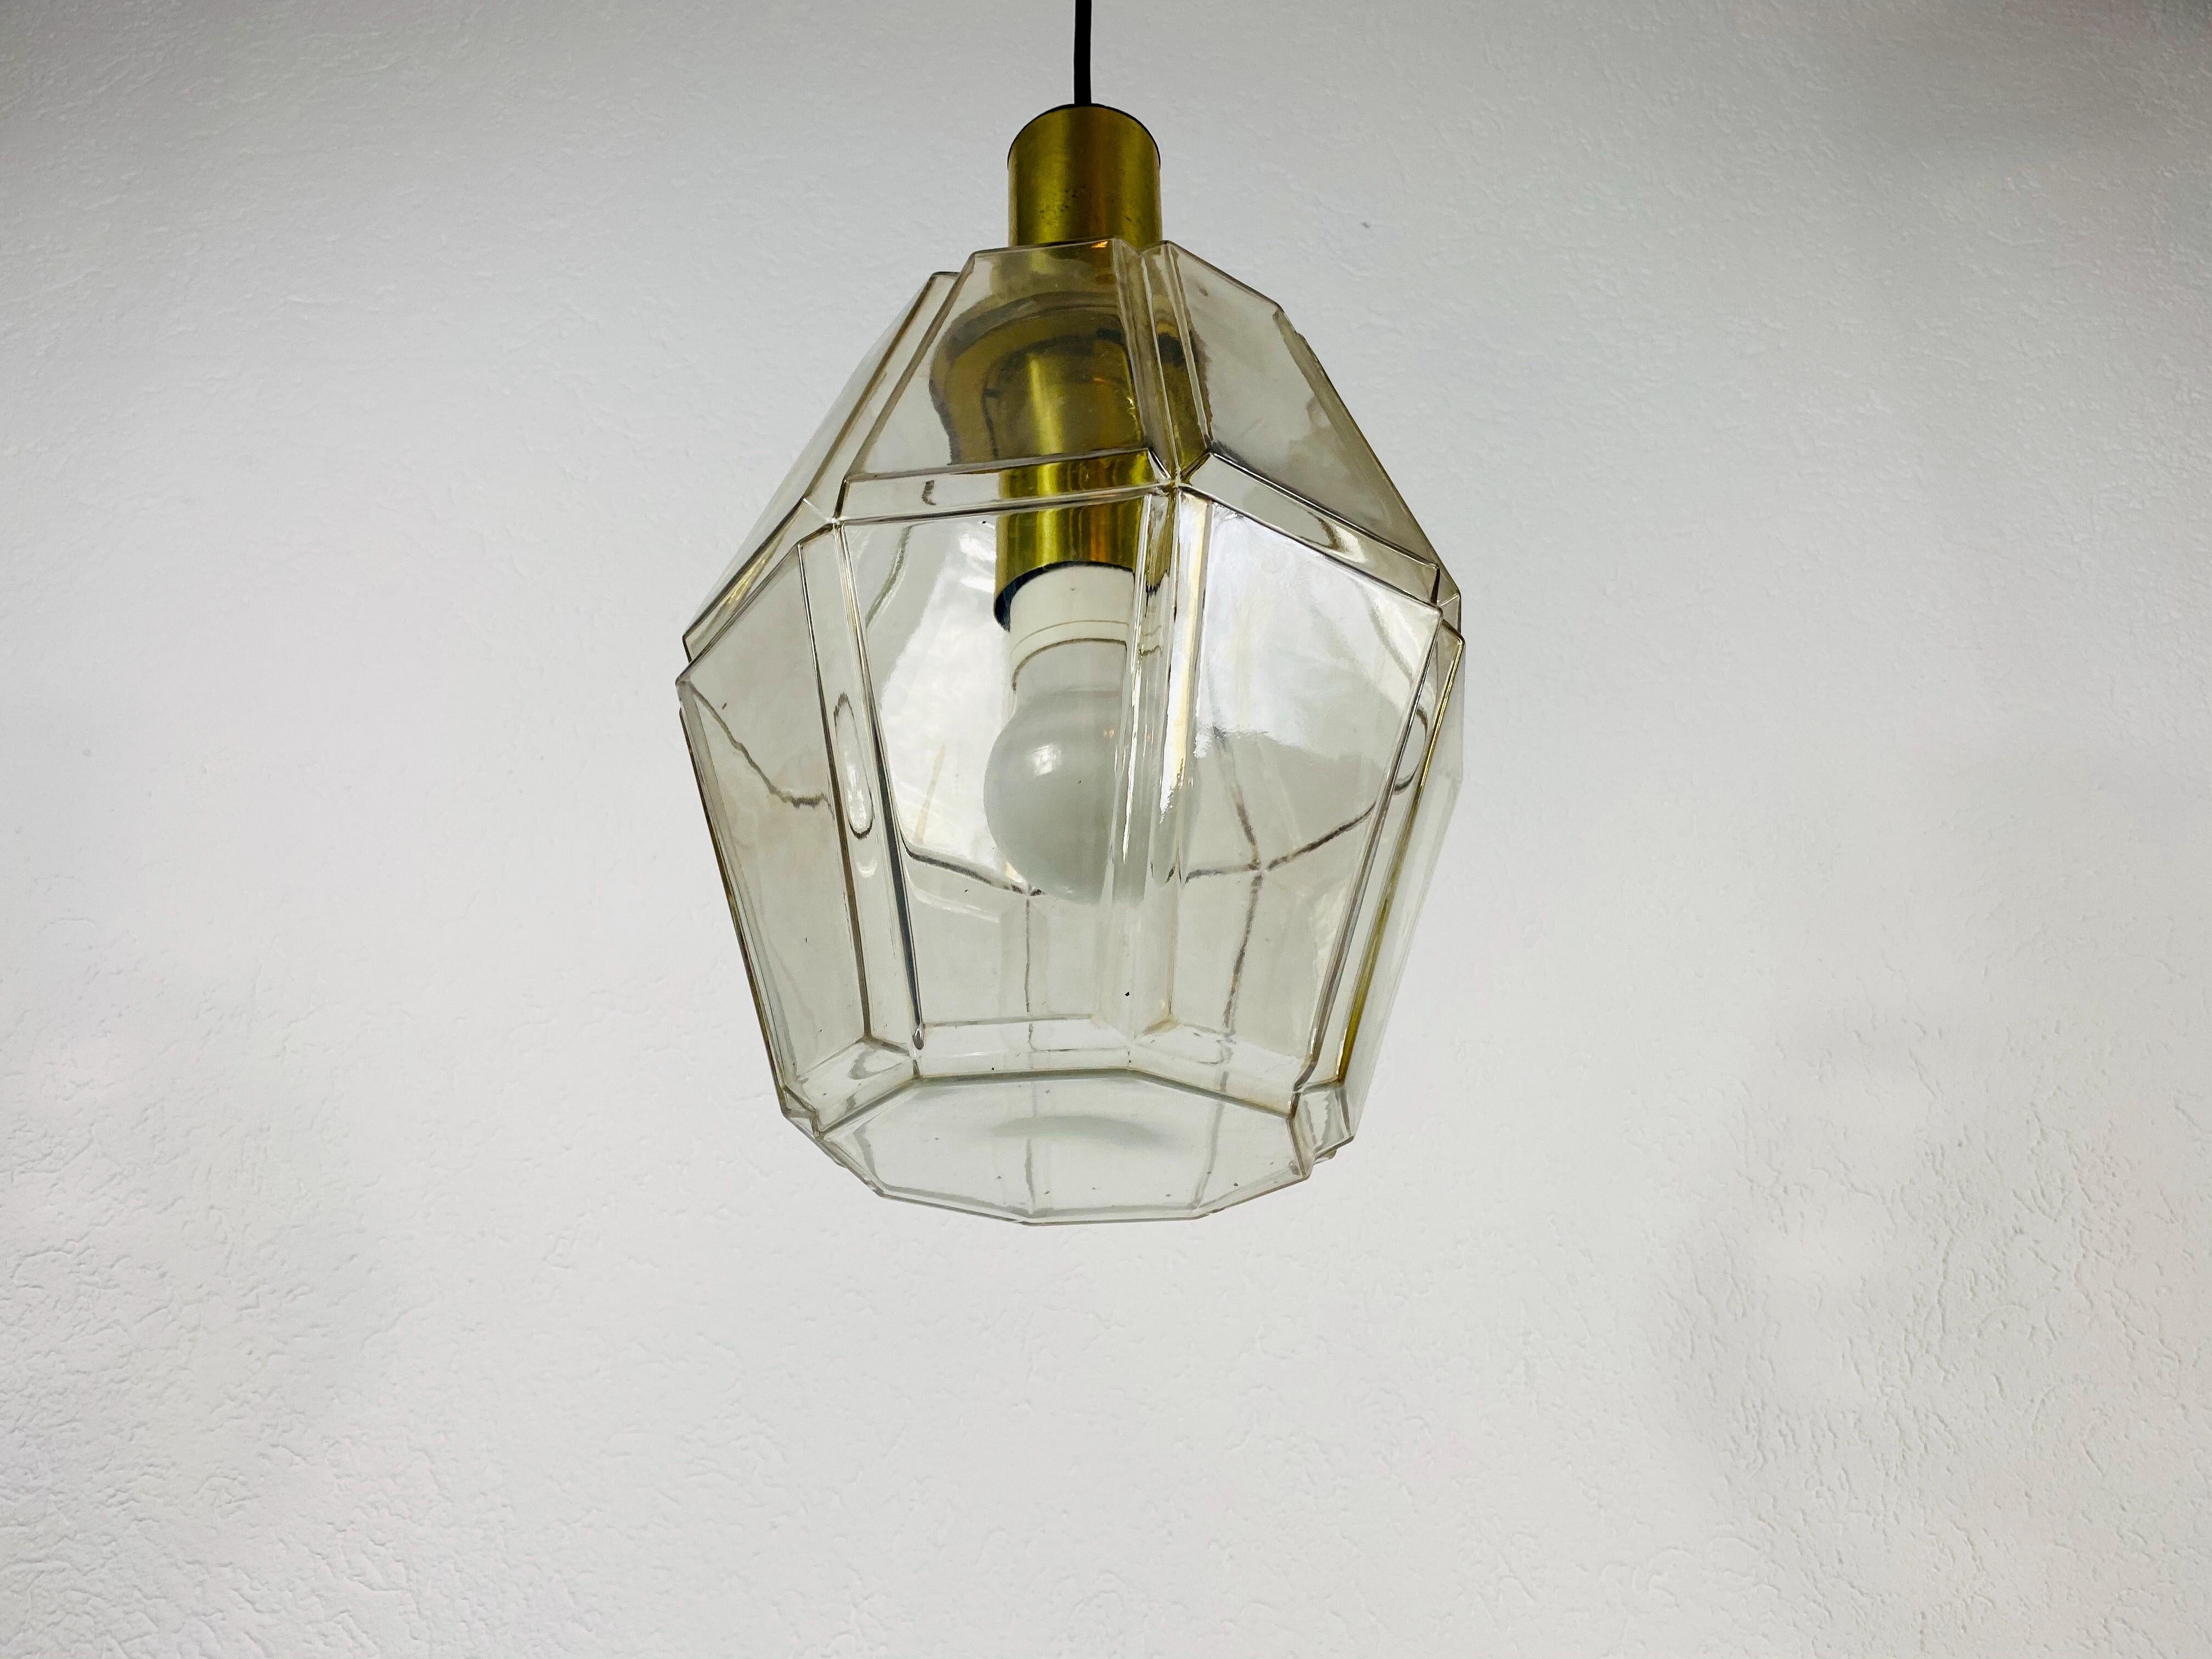 A Mid-Century Modern pendant lamp by Glashütte Limburg made in the 1960s in Germany. It is fascinating with its beautiful structured glass. The fixture has a very nice Minimalist design.

The light requires one E27 light bulb.